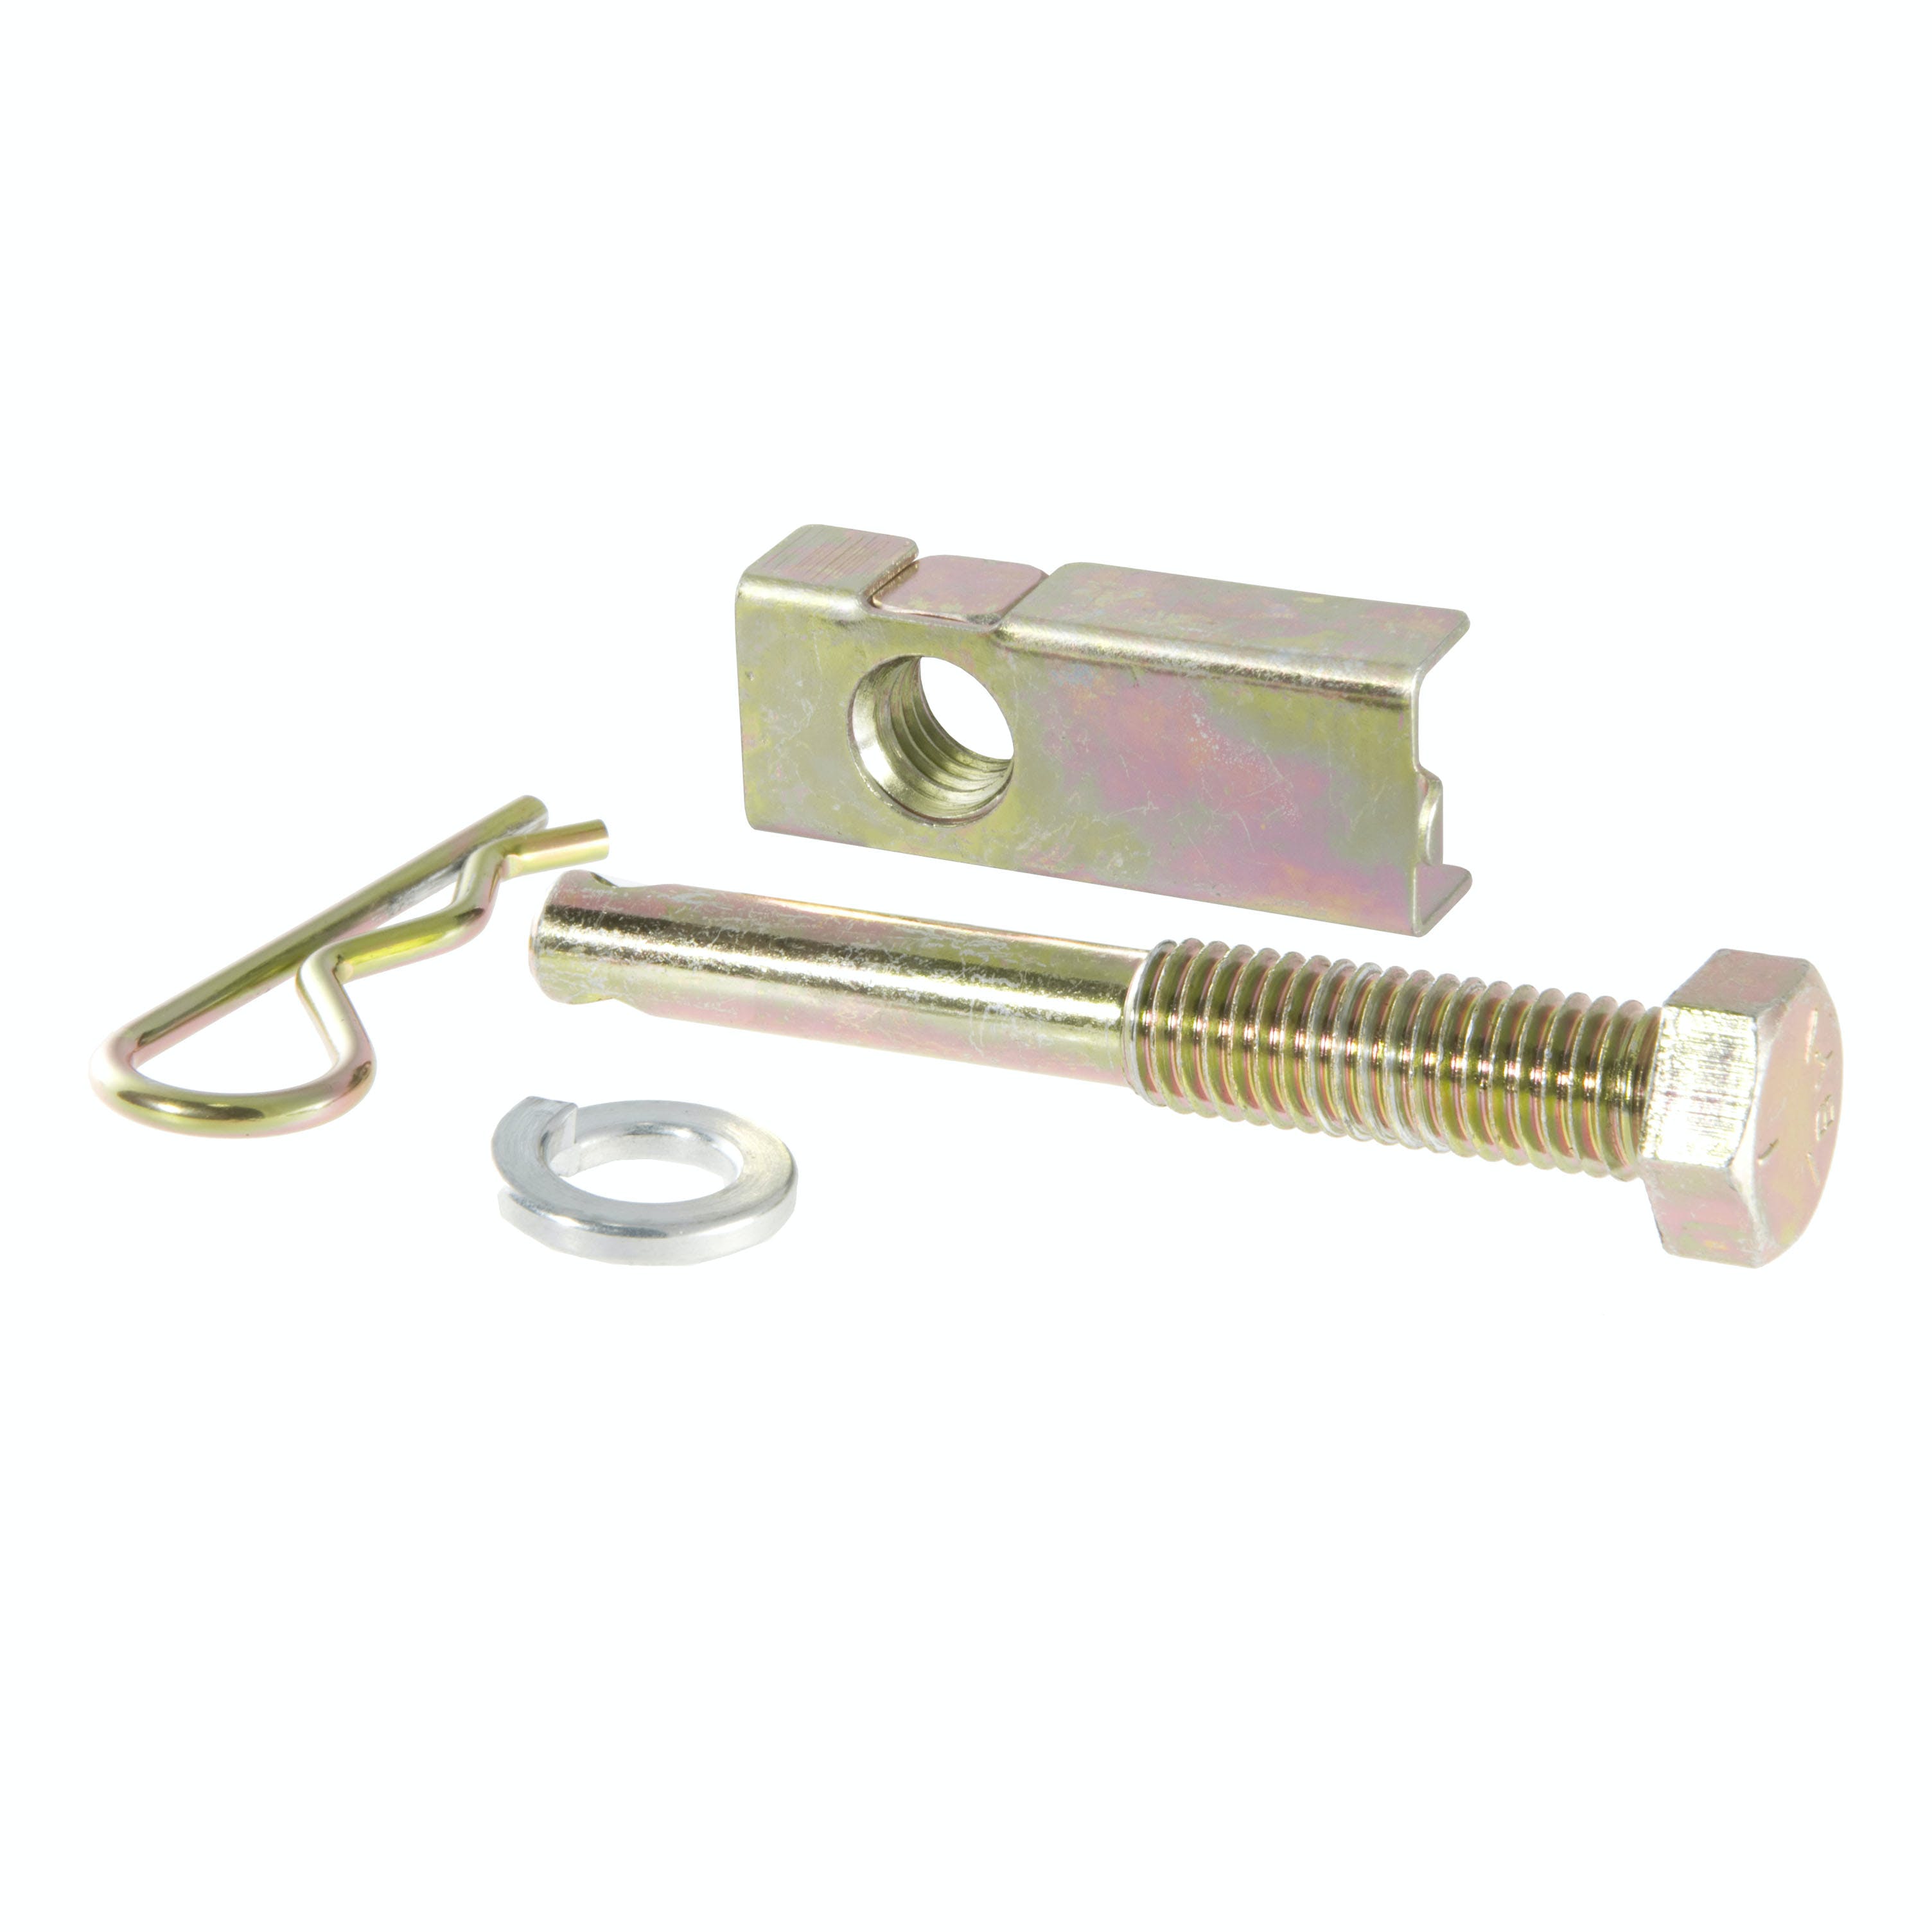 CURT 22315 Anti-Rattle Hitch Pin and Shim (Fits 1-1/4 Receiver with 1/2 Hole)